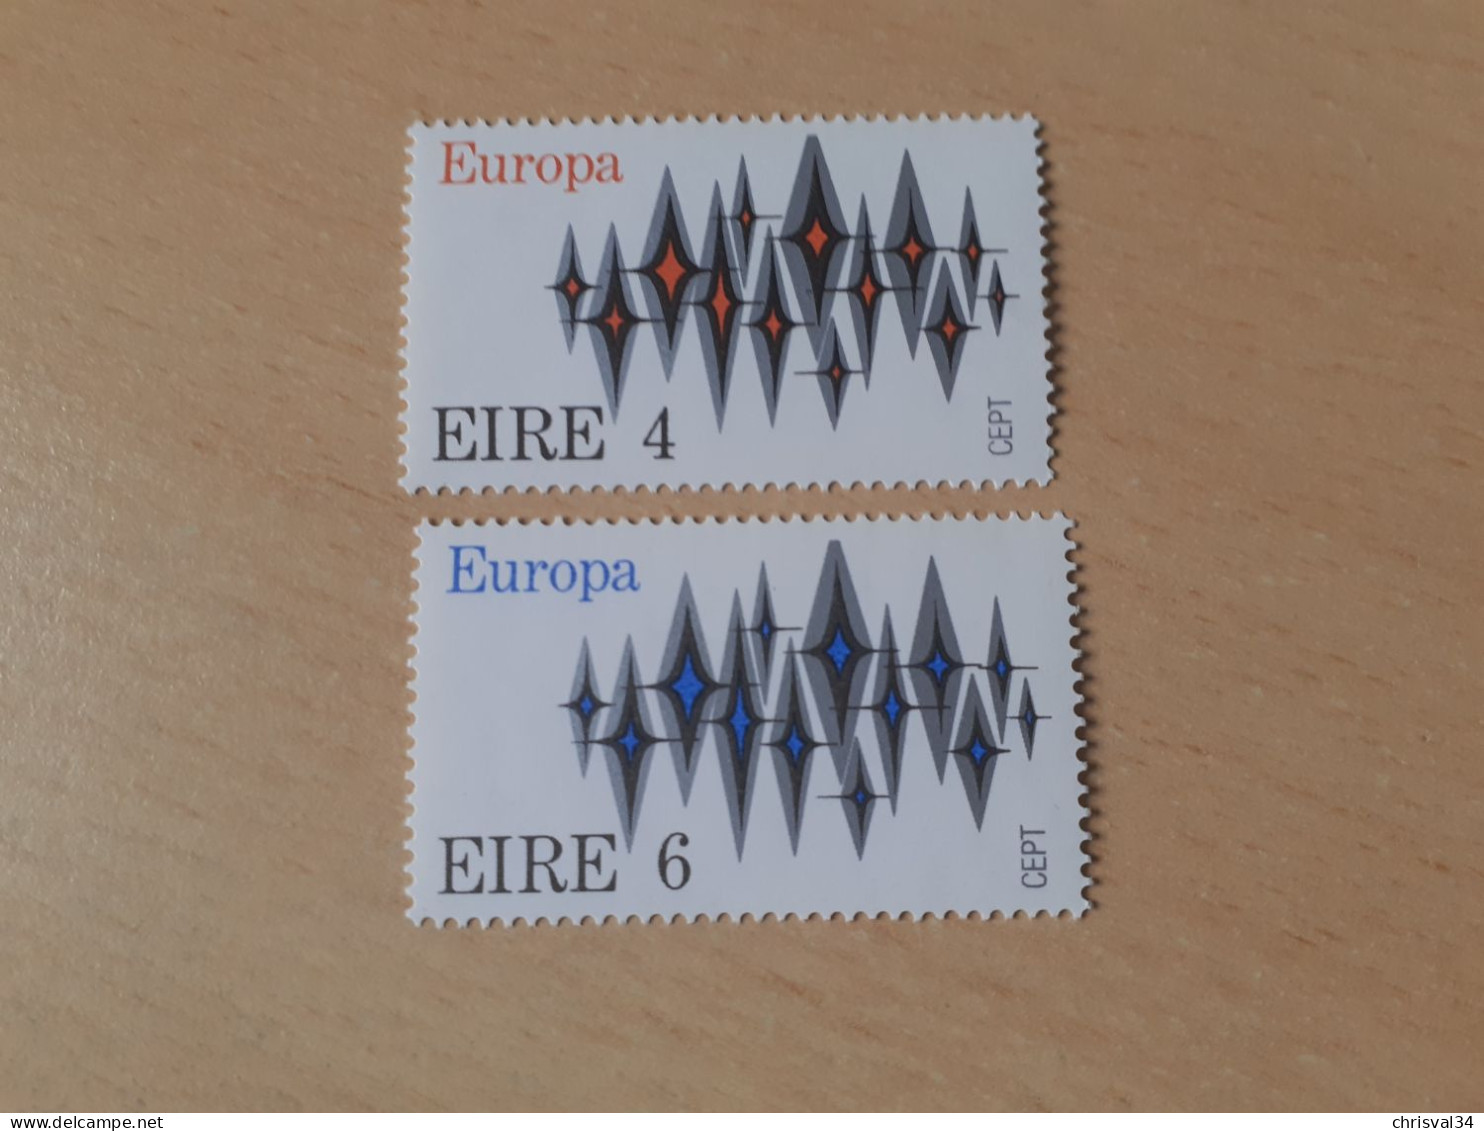 TIMBRES   IRLANDE   ANNEE   1972   N  278  /  279   COTE  20,00  EUROS   NEUFS  LUXE** - Neufs